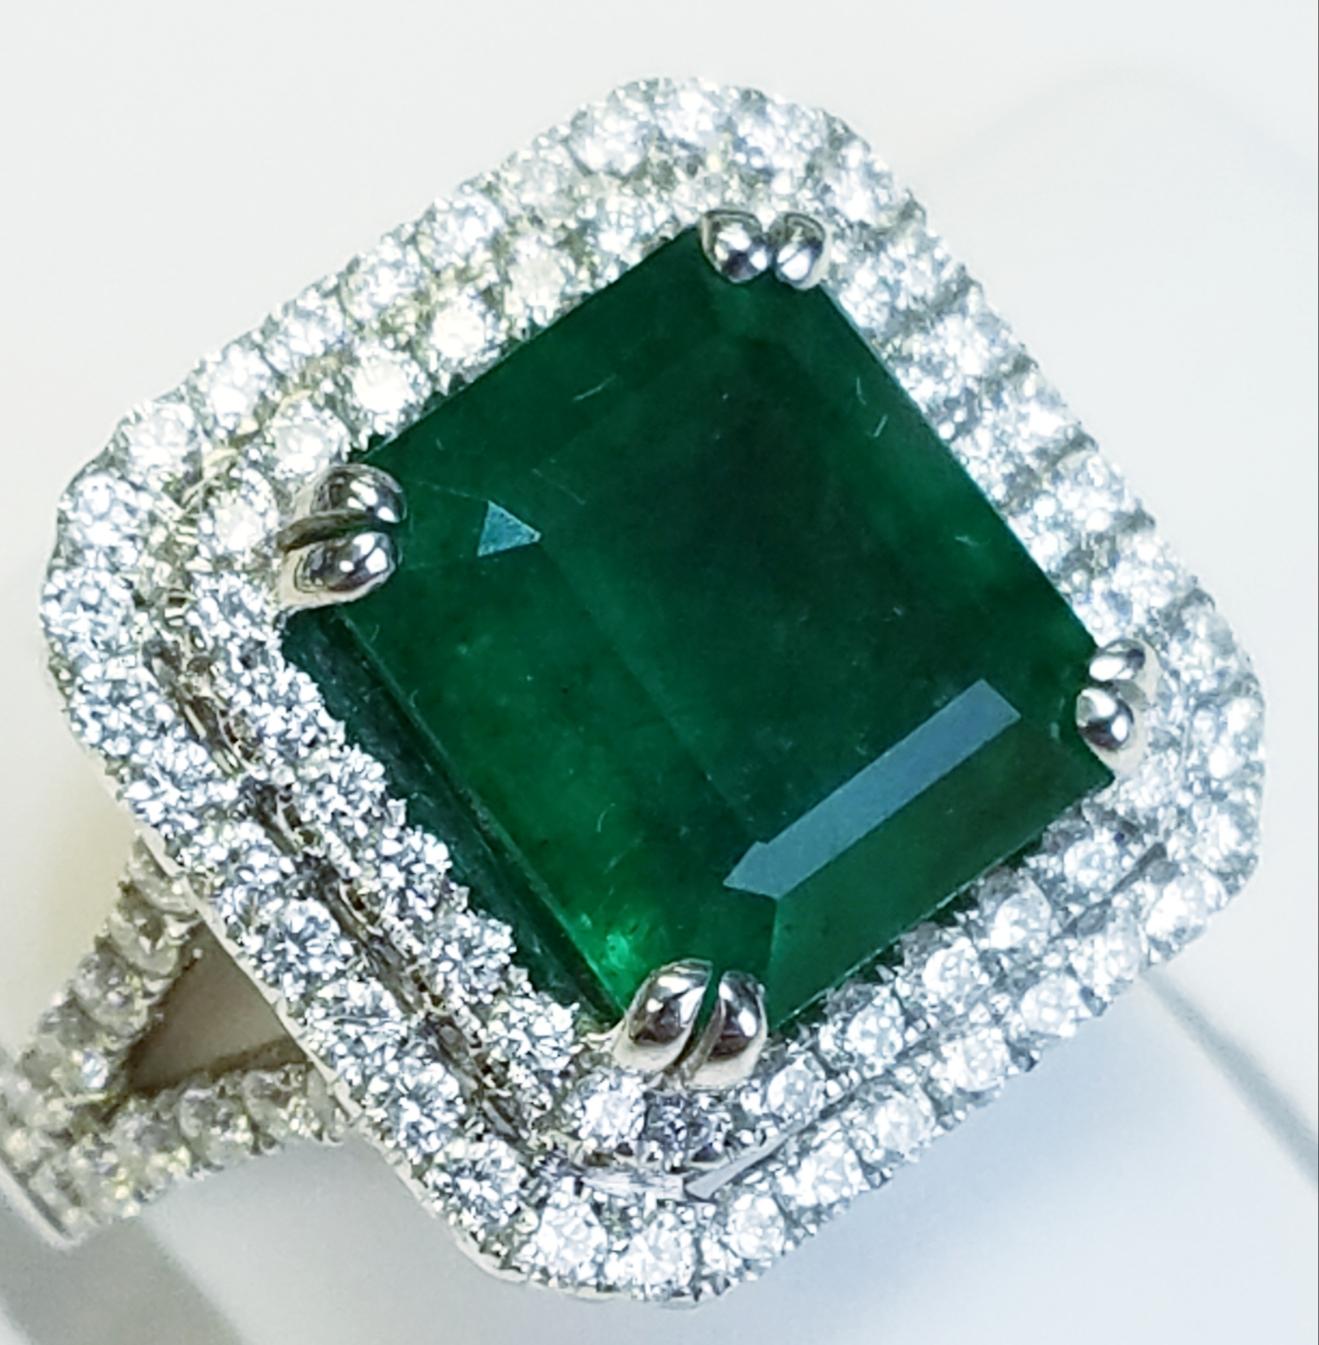 GIA Certified 18k White Gold Emerald Cut Emerald and Diamond Ring
5.98 carats of Emeralds
1.25 carats of Diamonds
Emerald Cut
18k White Gold
GIA Certified
